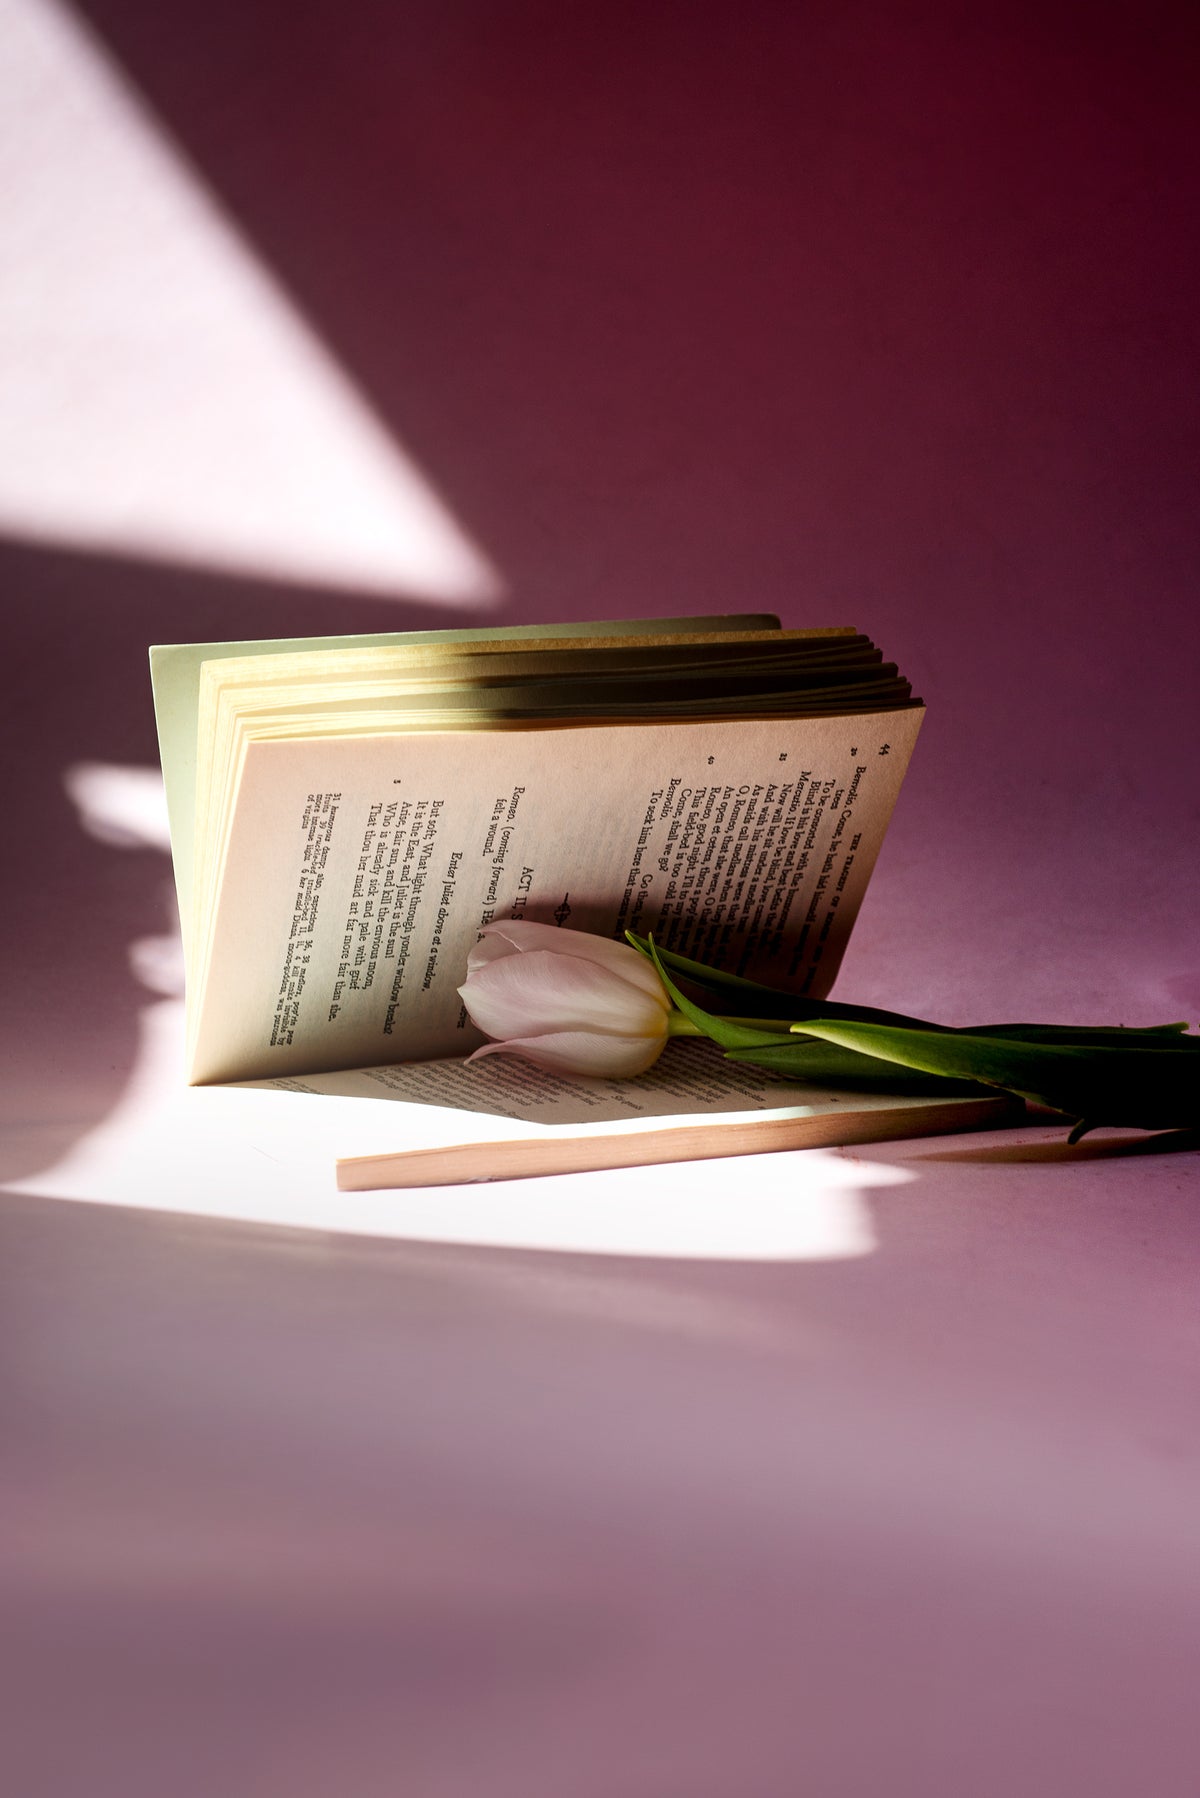 novel lays on a pink background with a tulip on side it